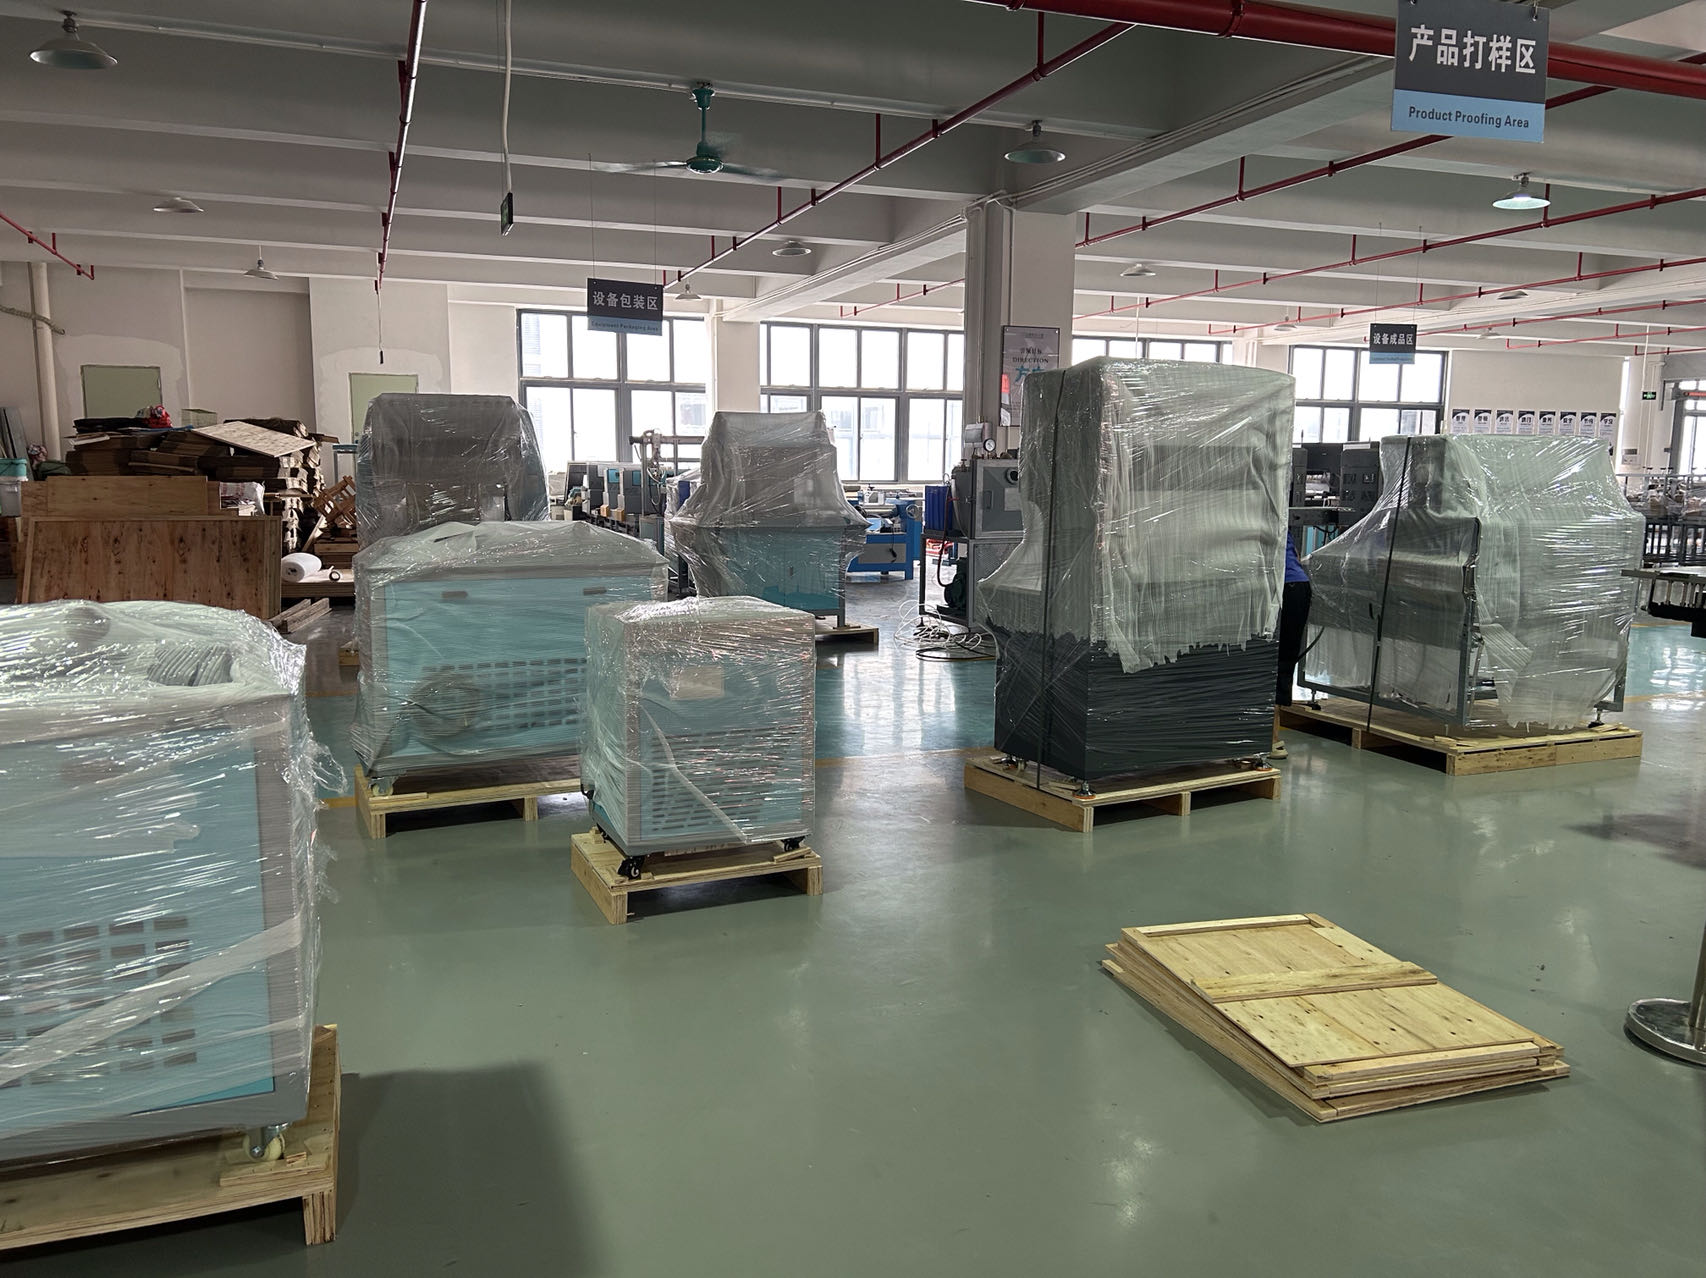 Jinyu Silicone Machines Have Been shipped In Several Batches